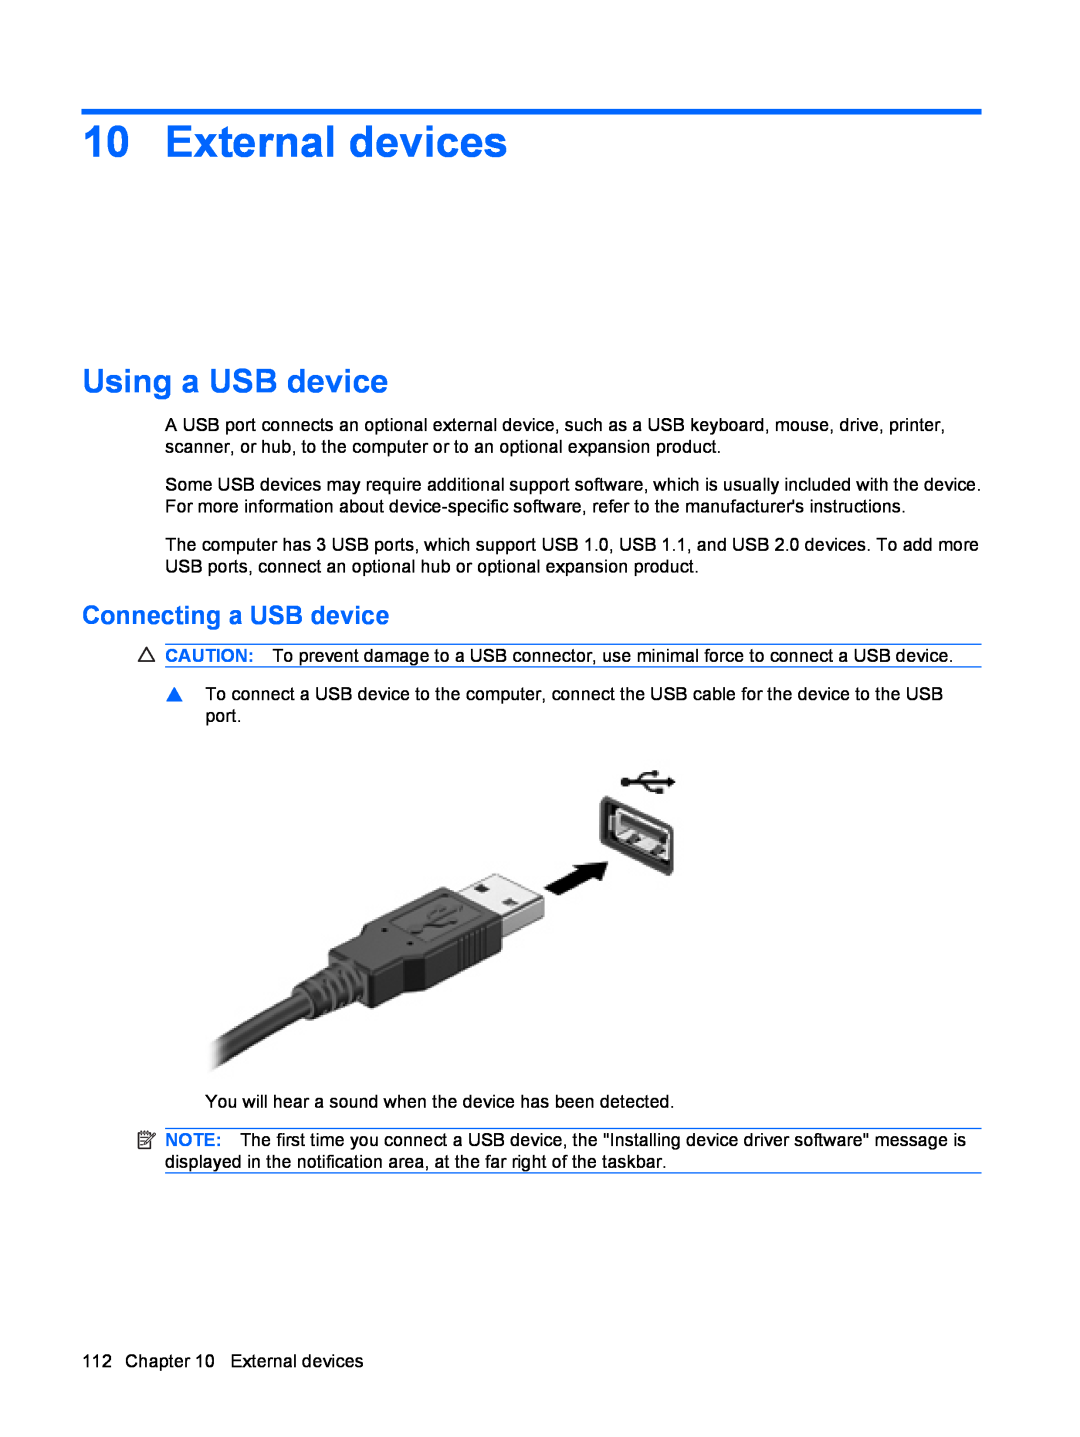 HP dv4-2160us manual External devices, Using a USB device, Connecting a USB device 